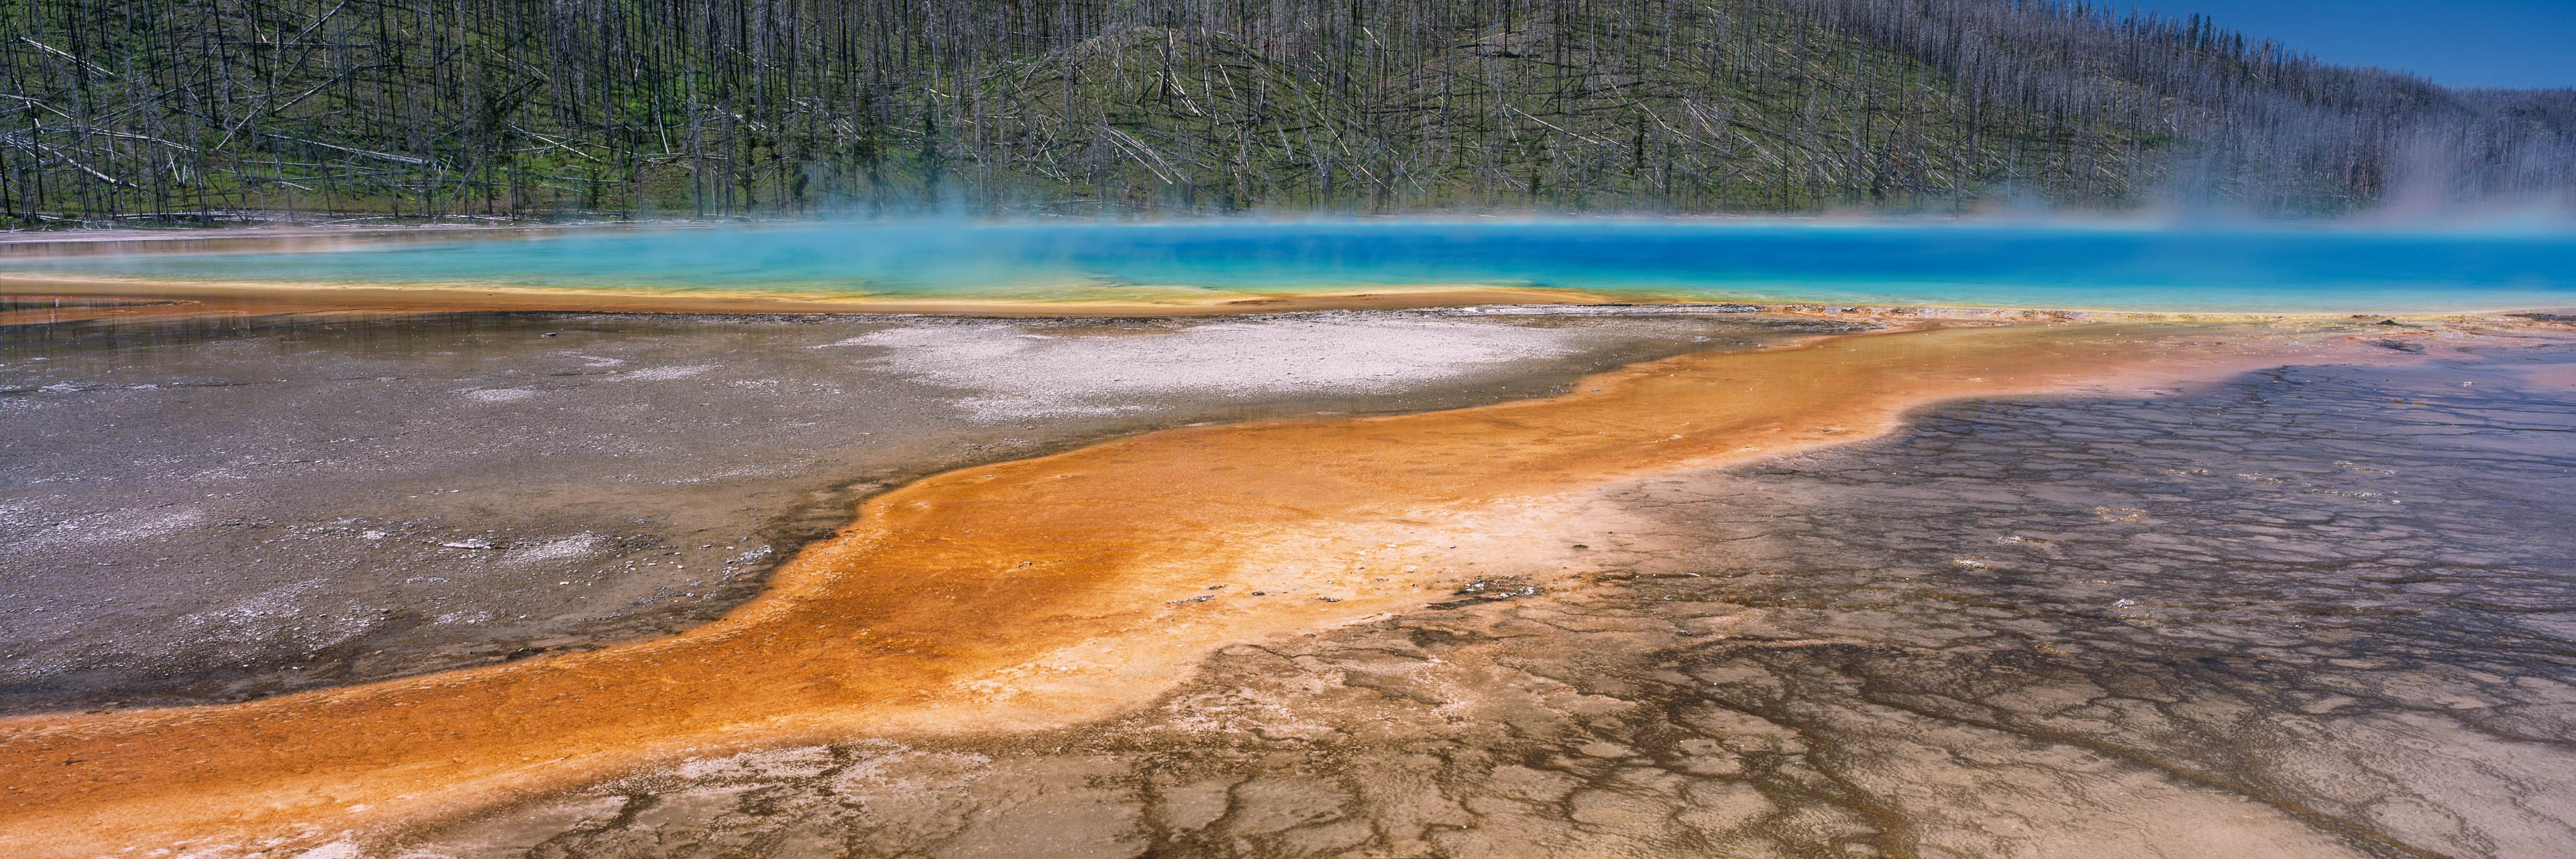 Grand Prismatic Spring, Yellowstone National Park, Wyoming,USA